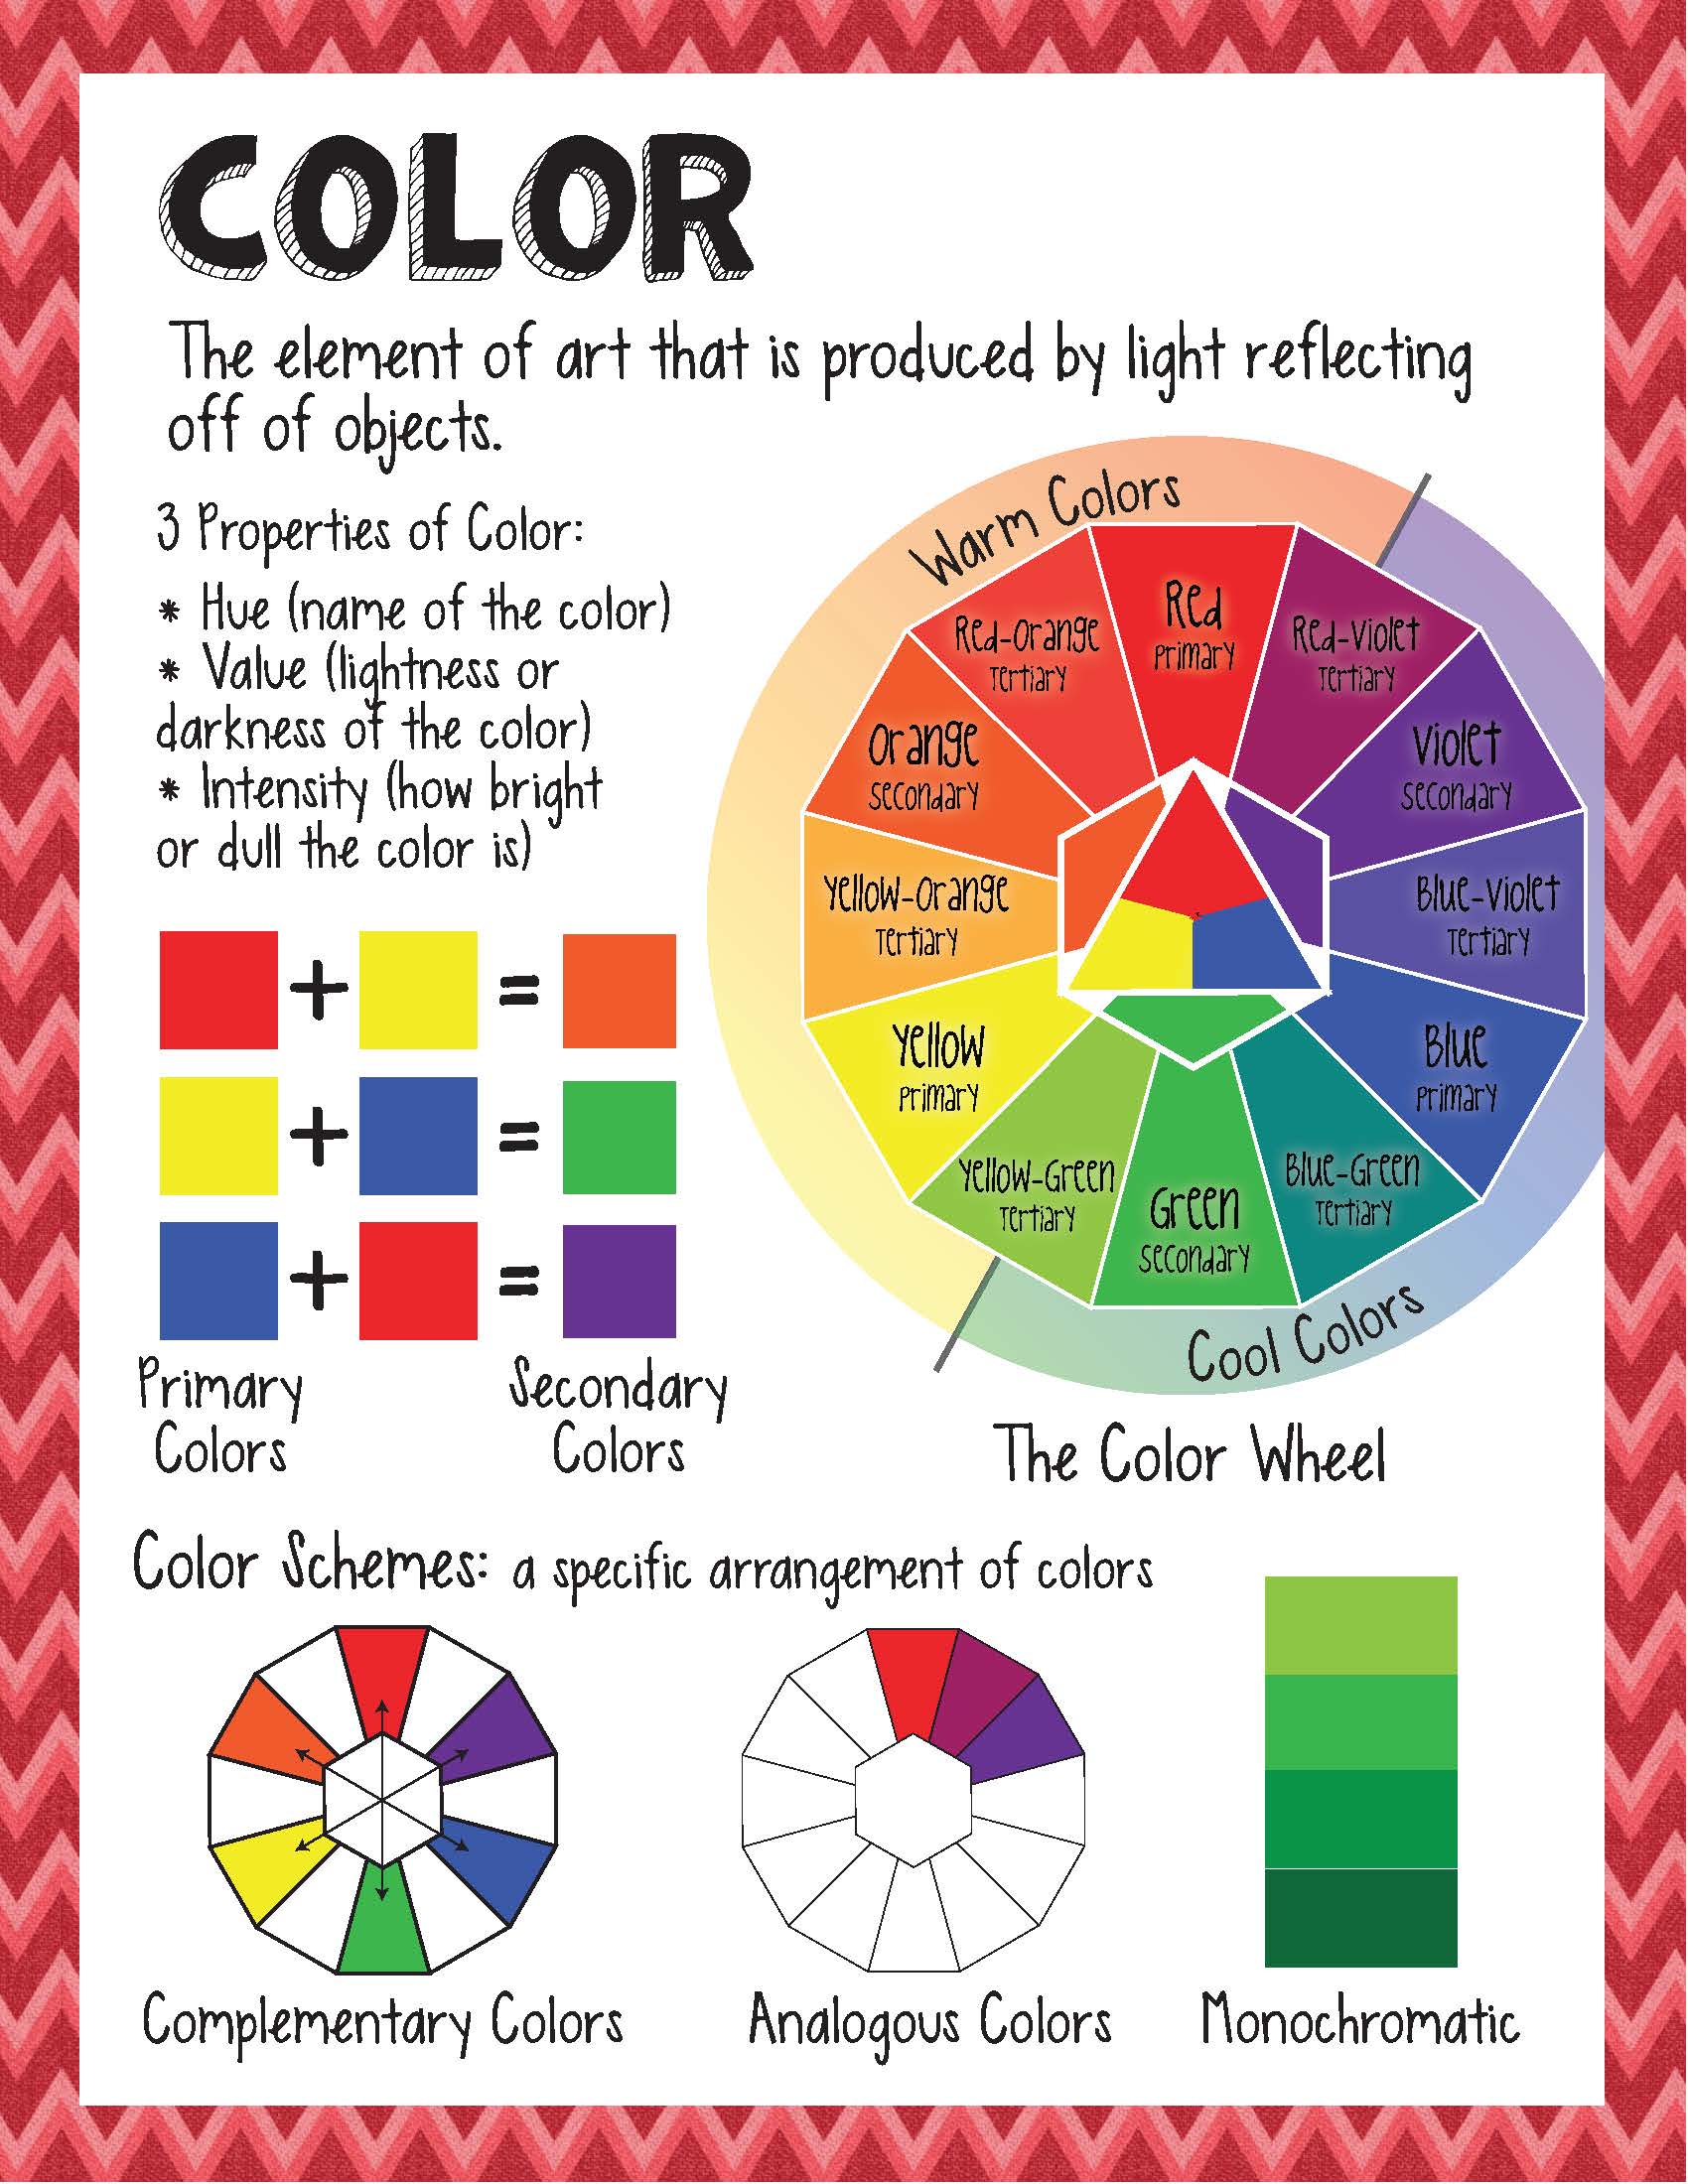 Color element. Elements of Art. Elements of Art Color. The elements and principles of Art.